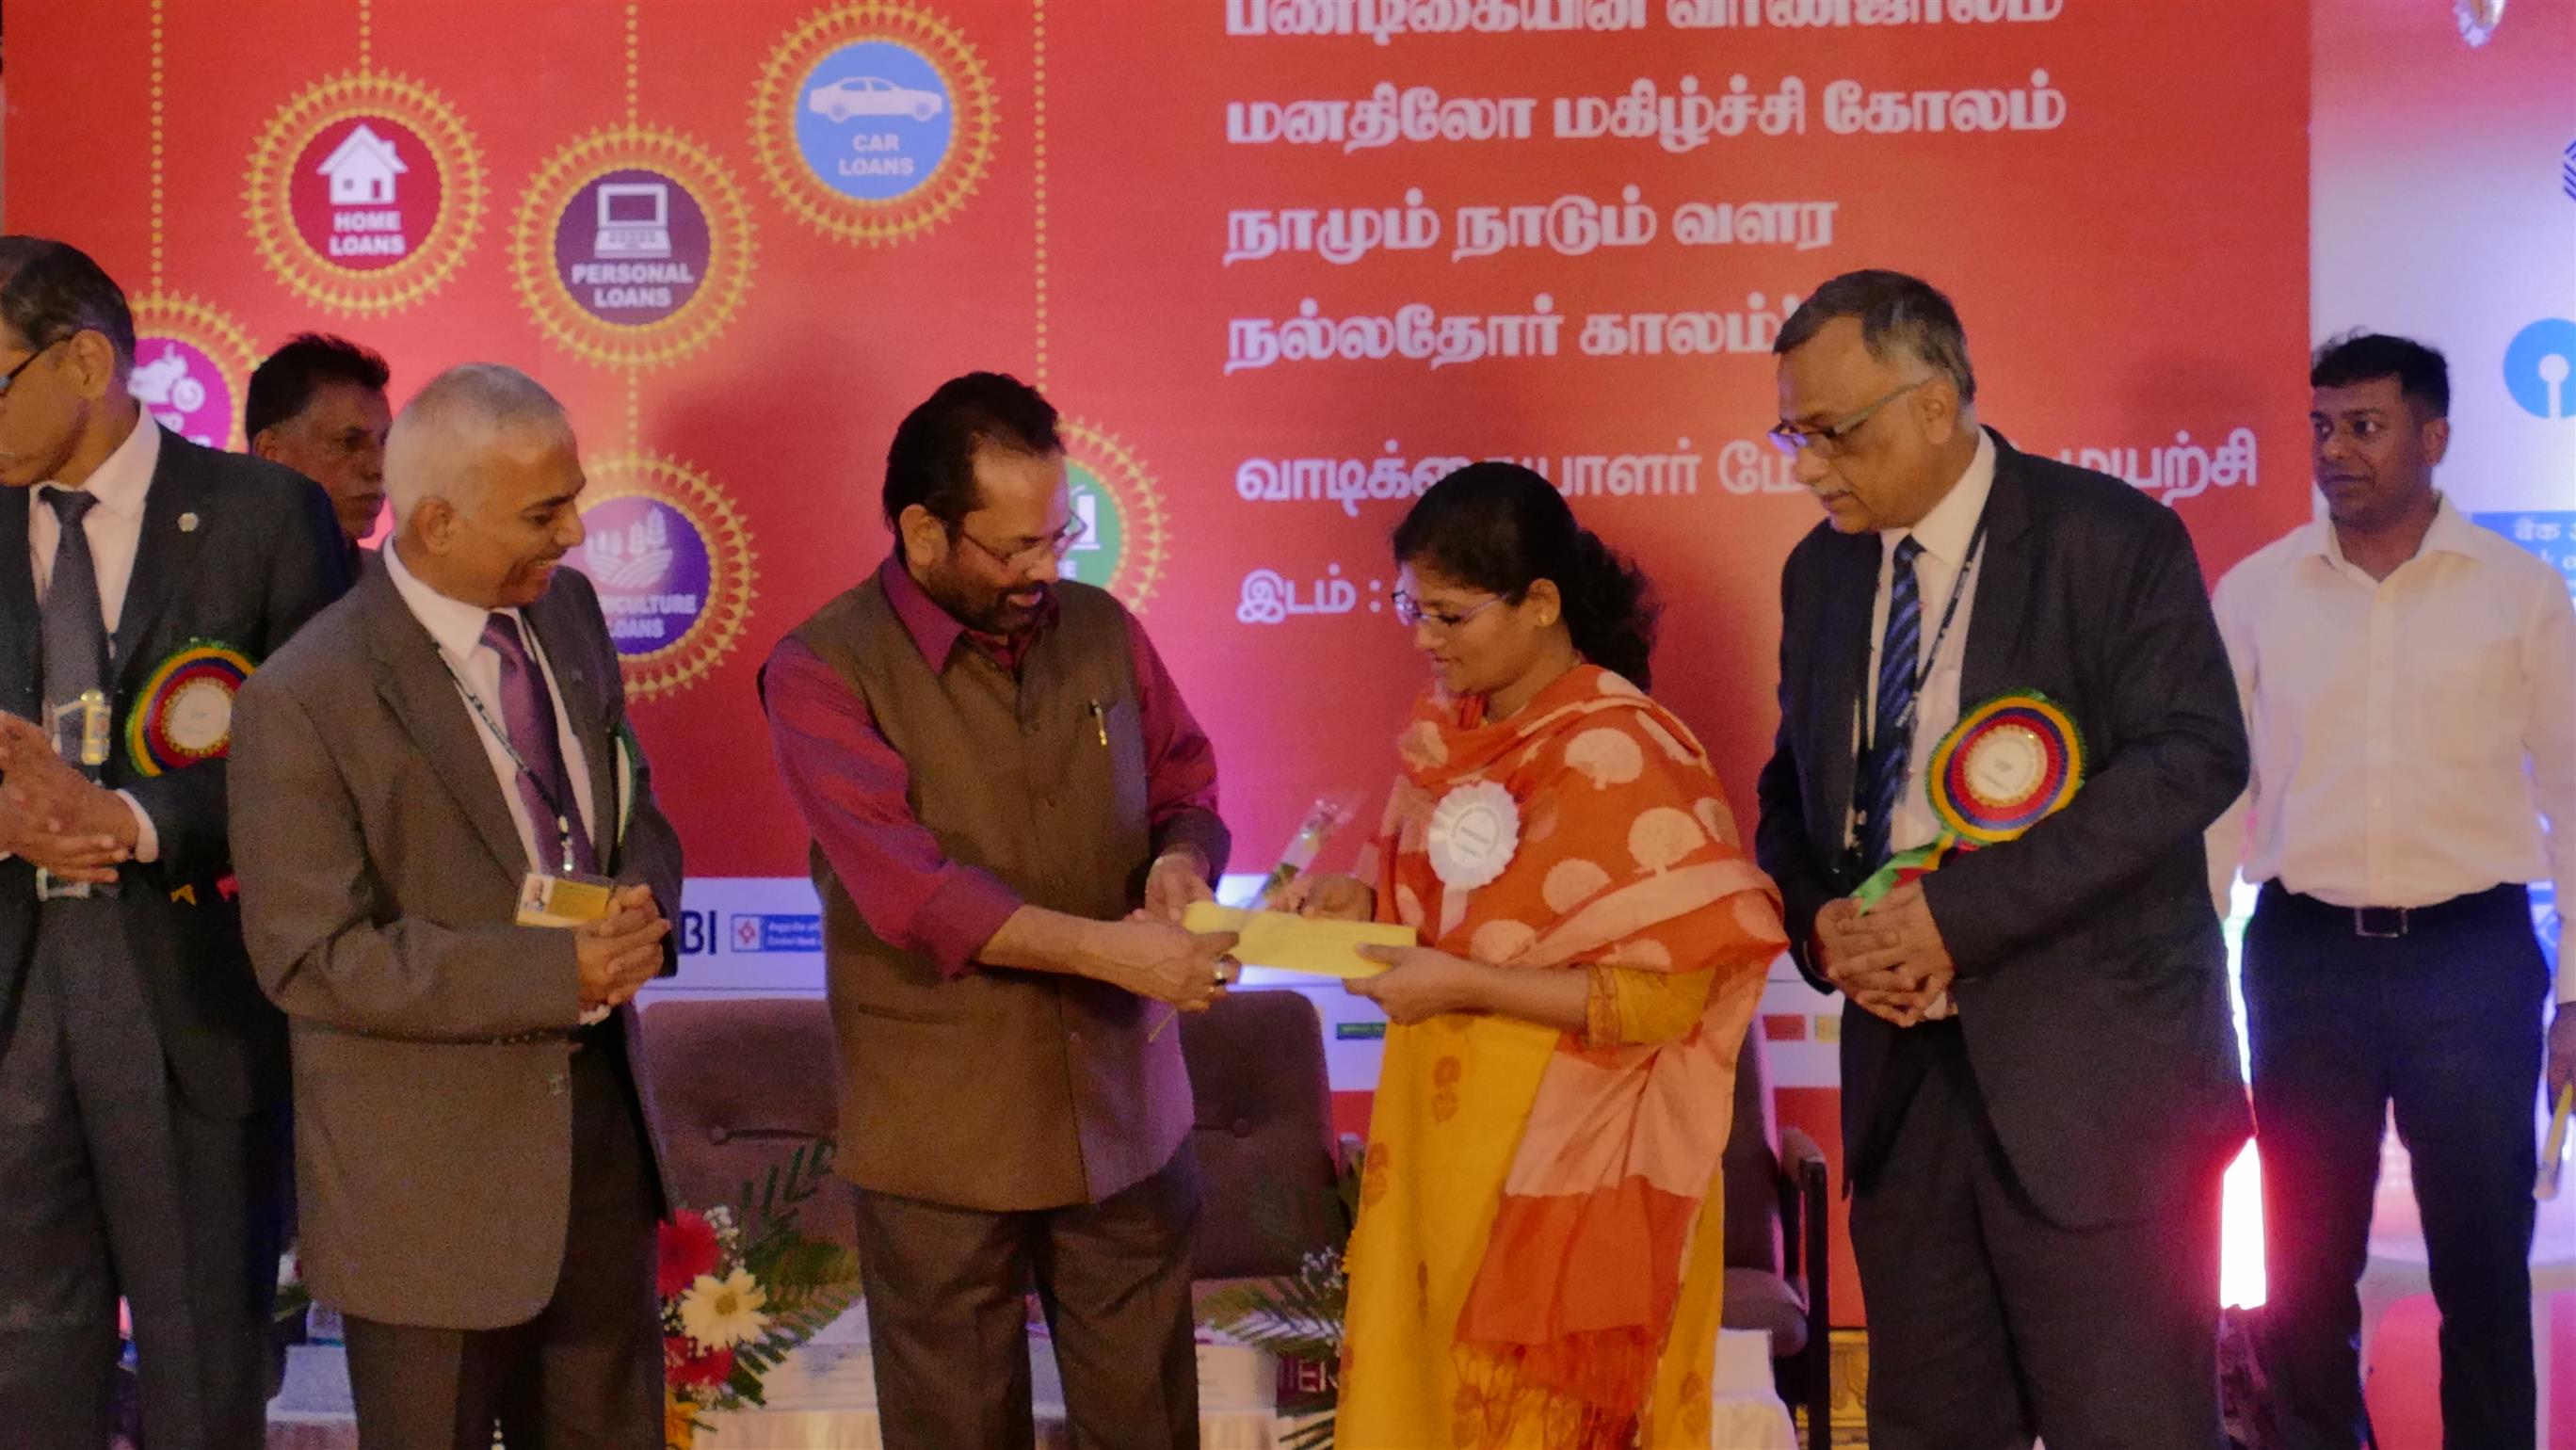 Shri. Mukhtar Abbas Naqvi, Union Minister for Minority Affairs addressing the Customers Outreach Initiative Programme organised by the Indian Overseas Bank, today, at Chennai. (October 5, 2019)